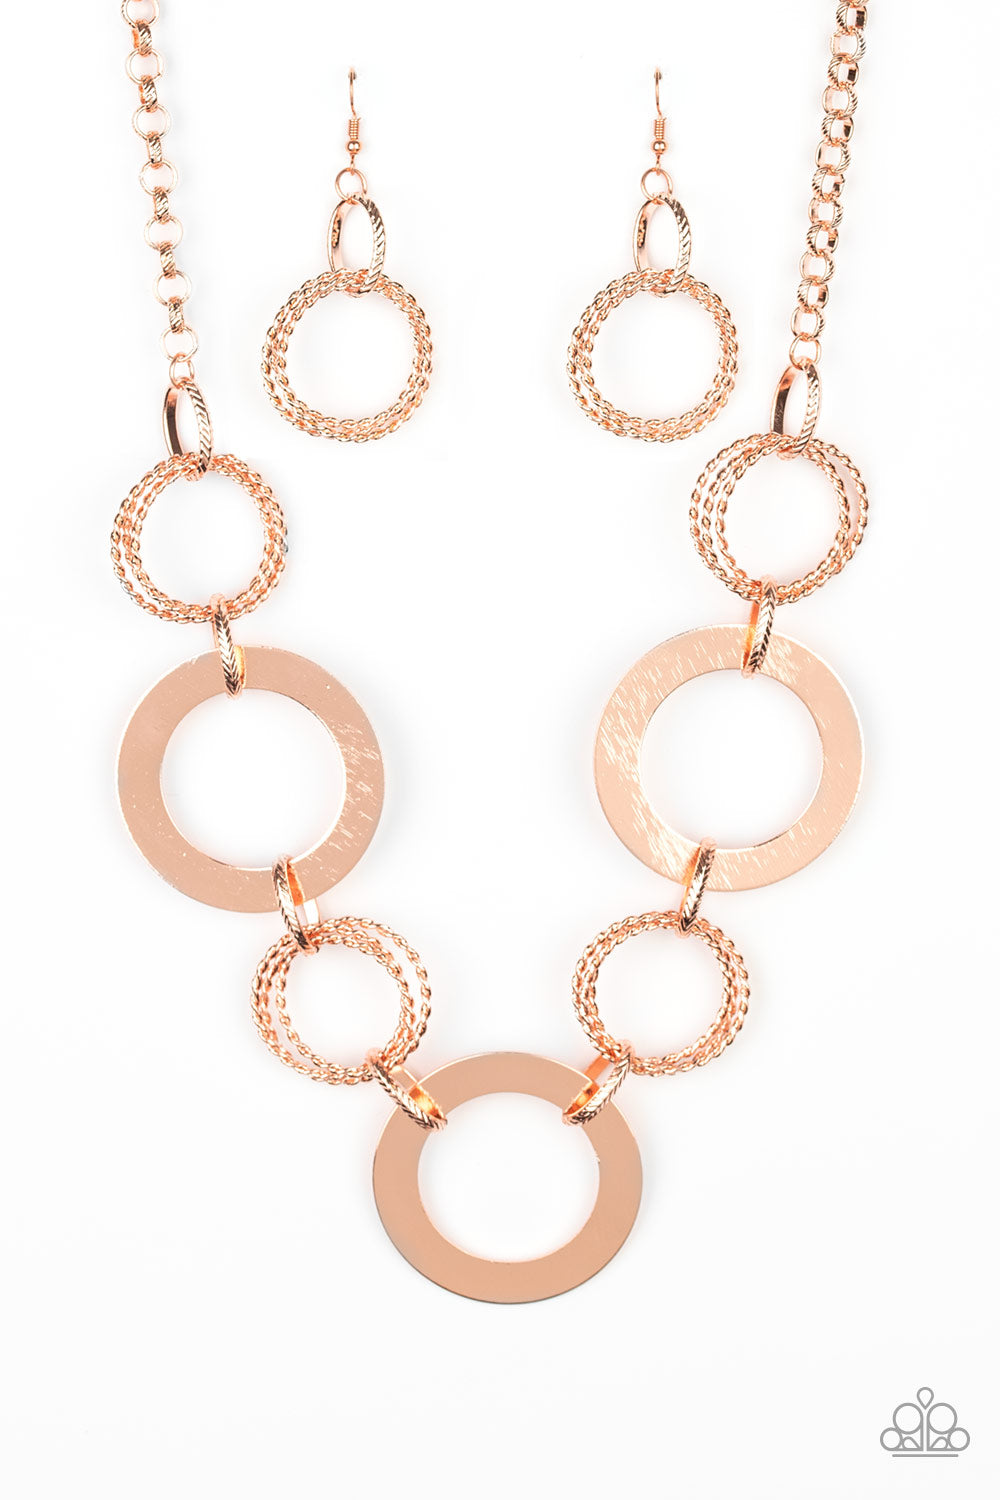 Paparazzi Accessories - Ringed in Radiance - Copper Necklace